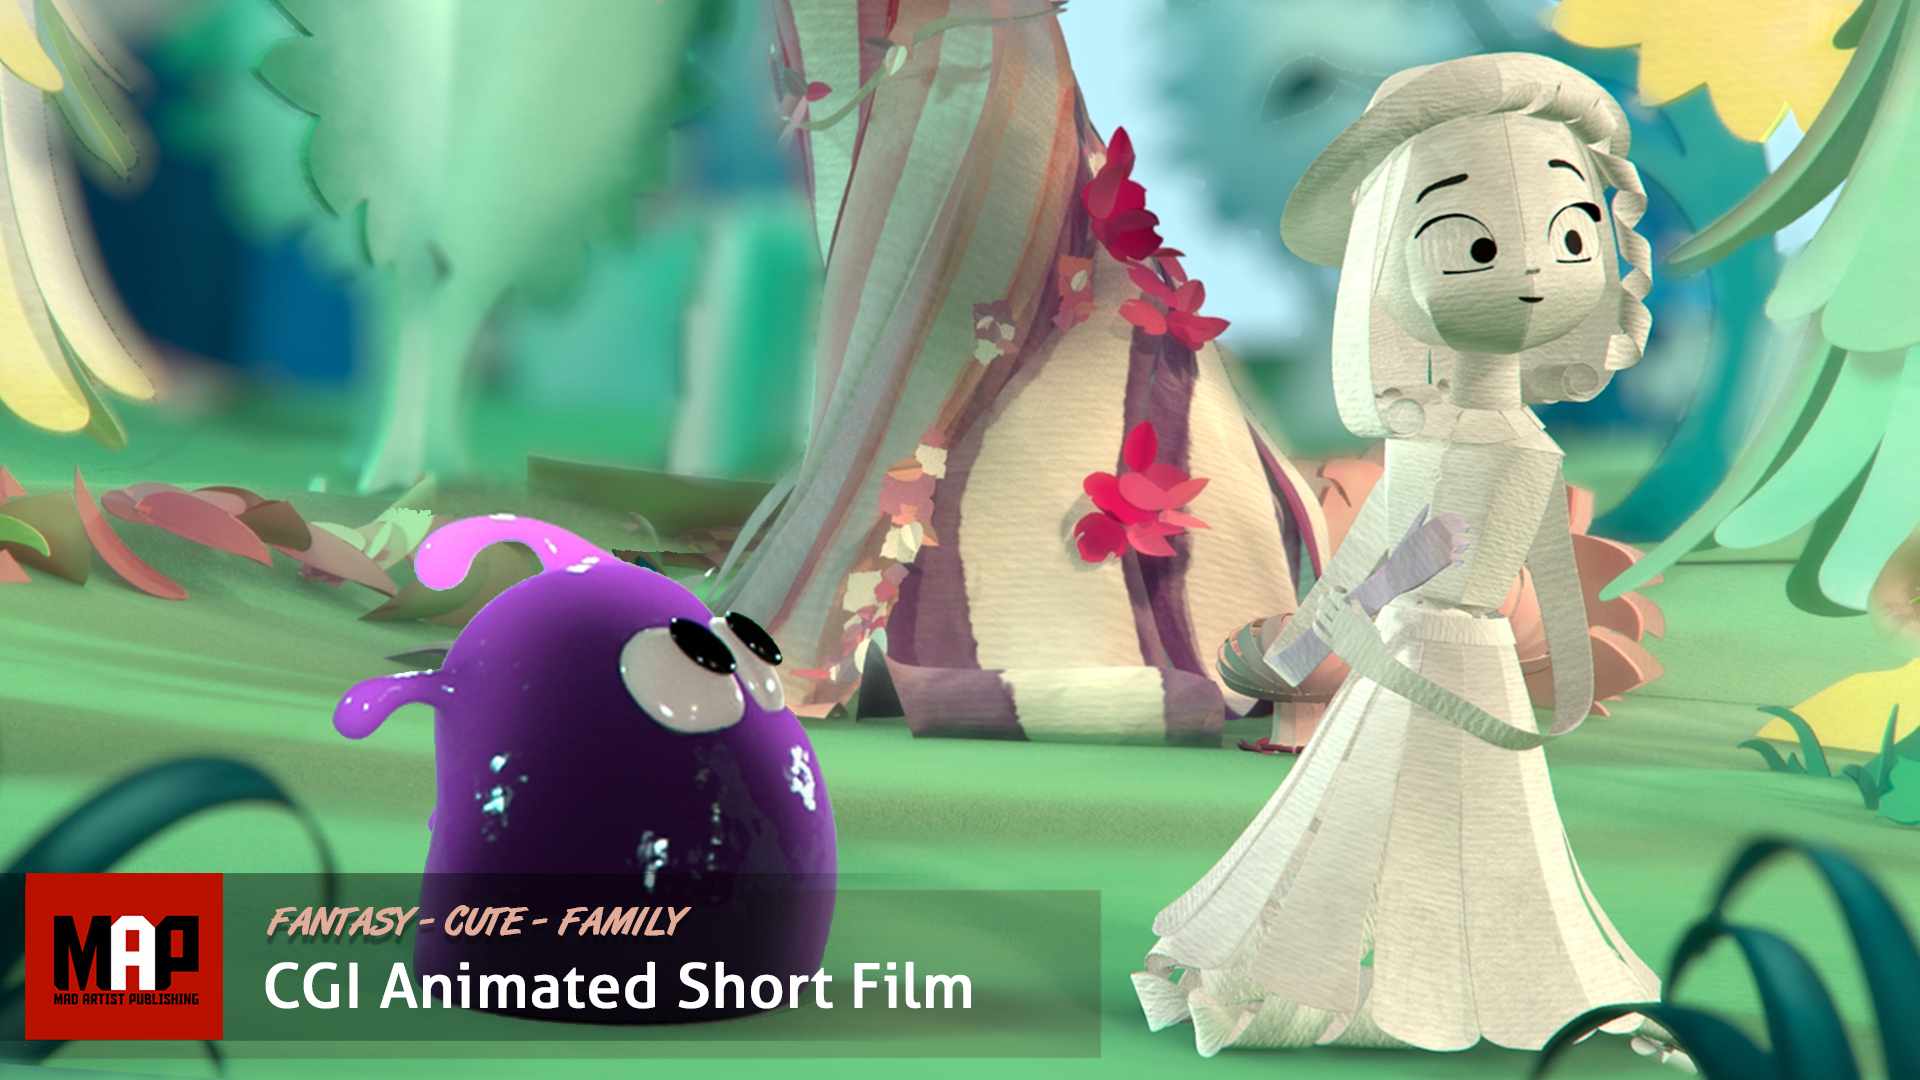 Cute CGI 3d Animated Short Film ** A NEW HUE ** Charming Family Video For Kids